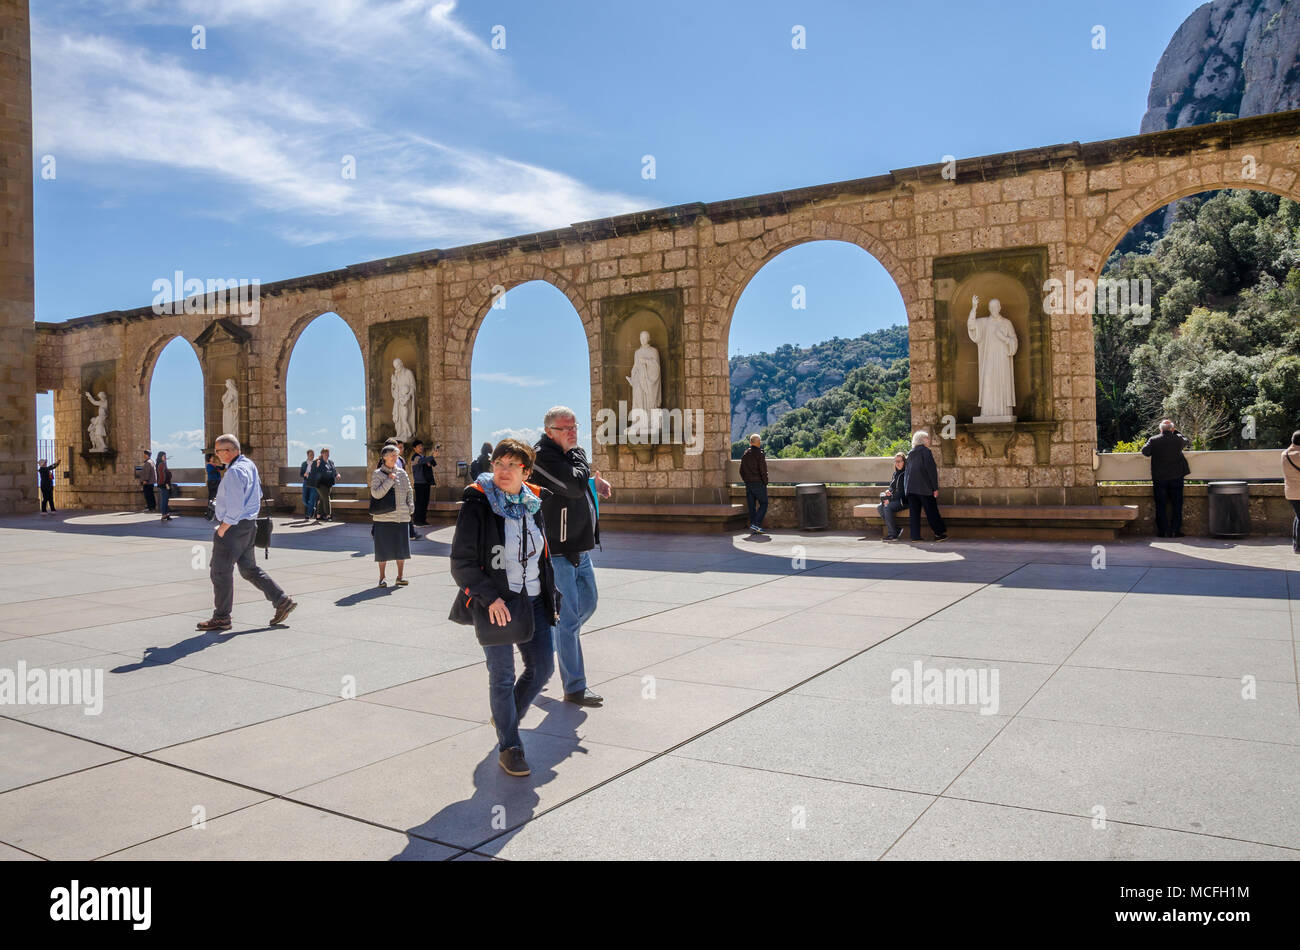 A stone wall at Santa Maria de Montserrat Abbey in Spain featuring archways and sculptures depicting religious figures or scenes. Stock Photo